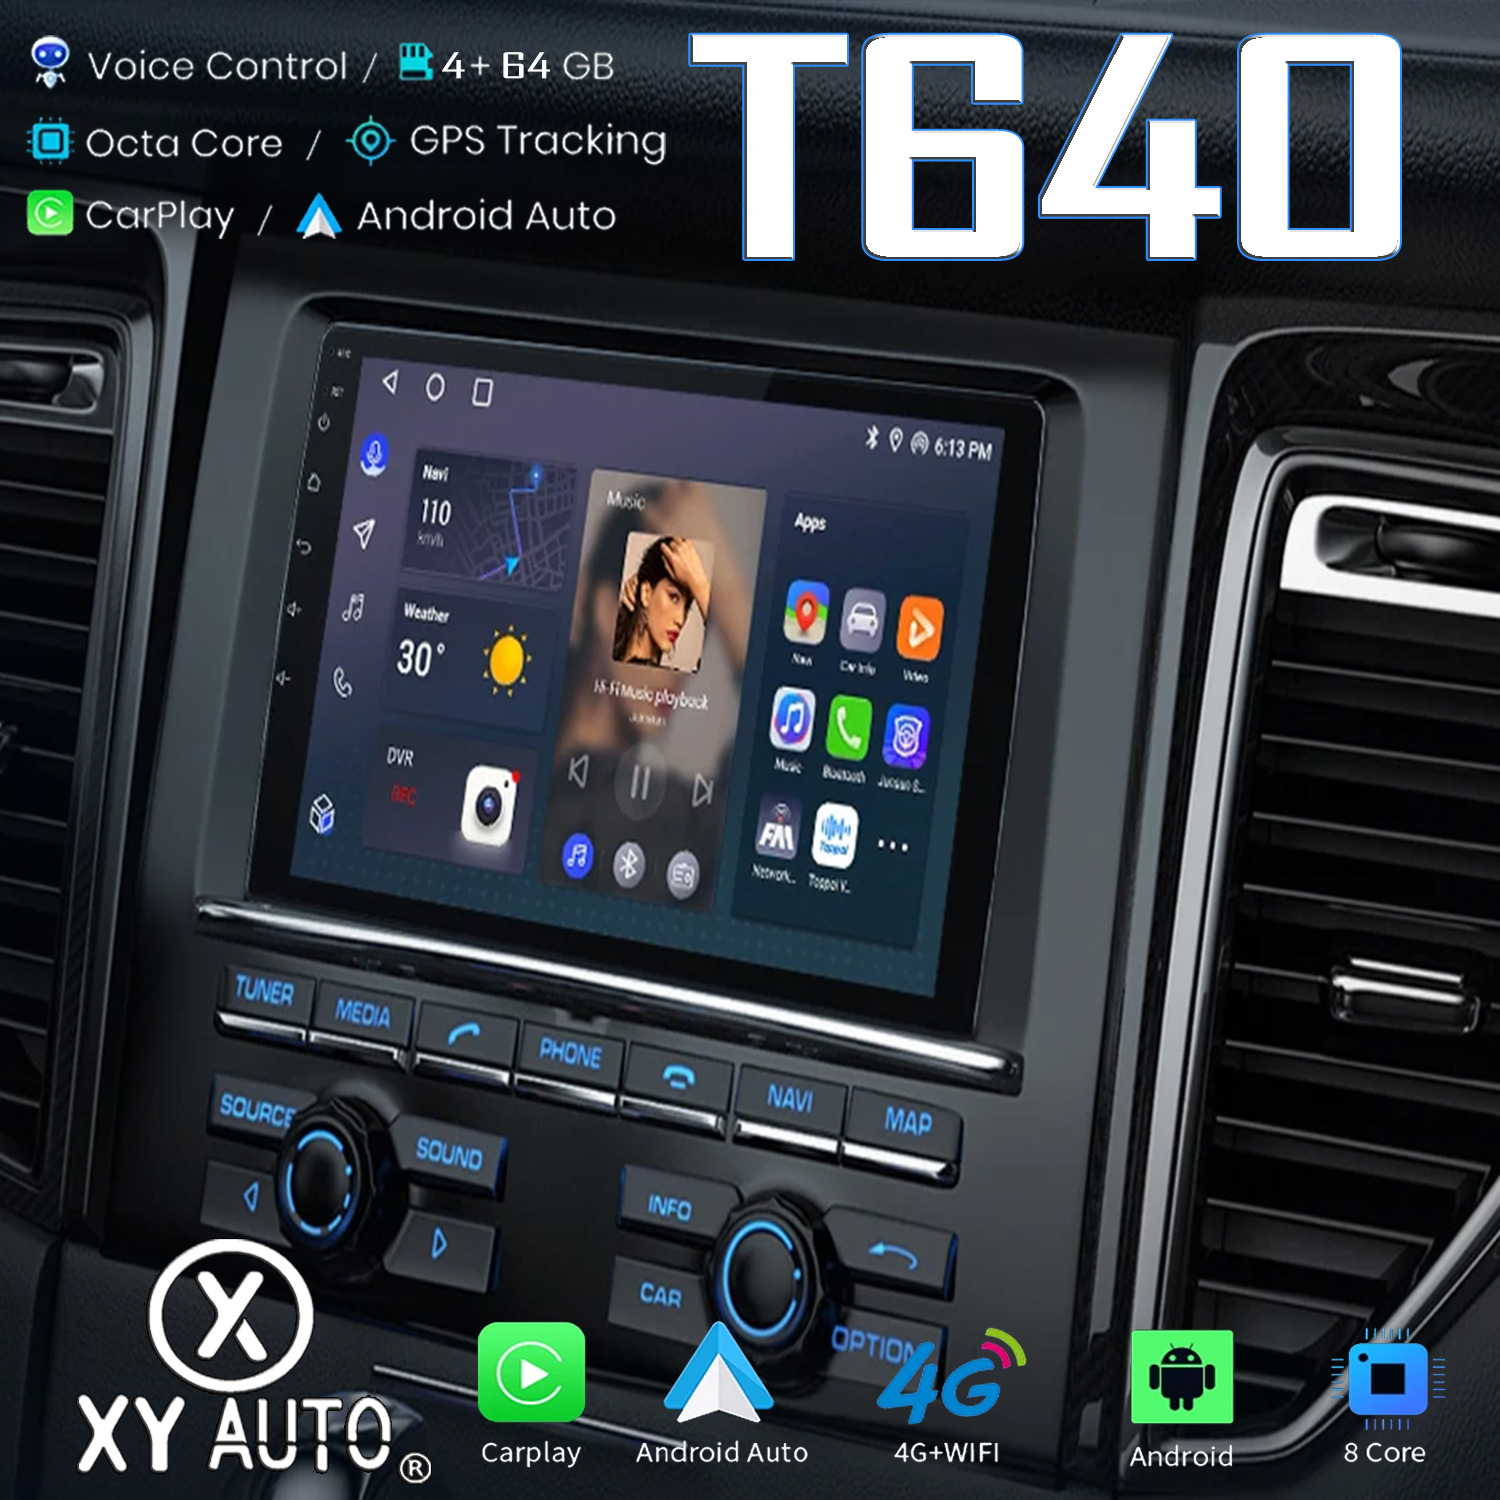 T640 XY Auto Car Android Stereo